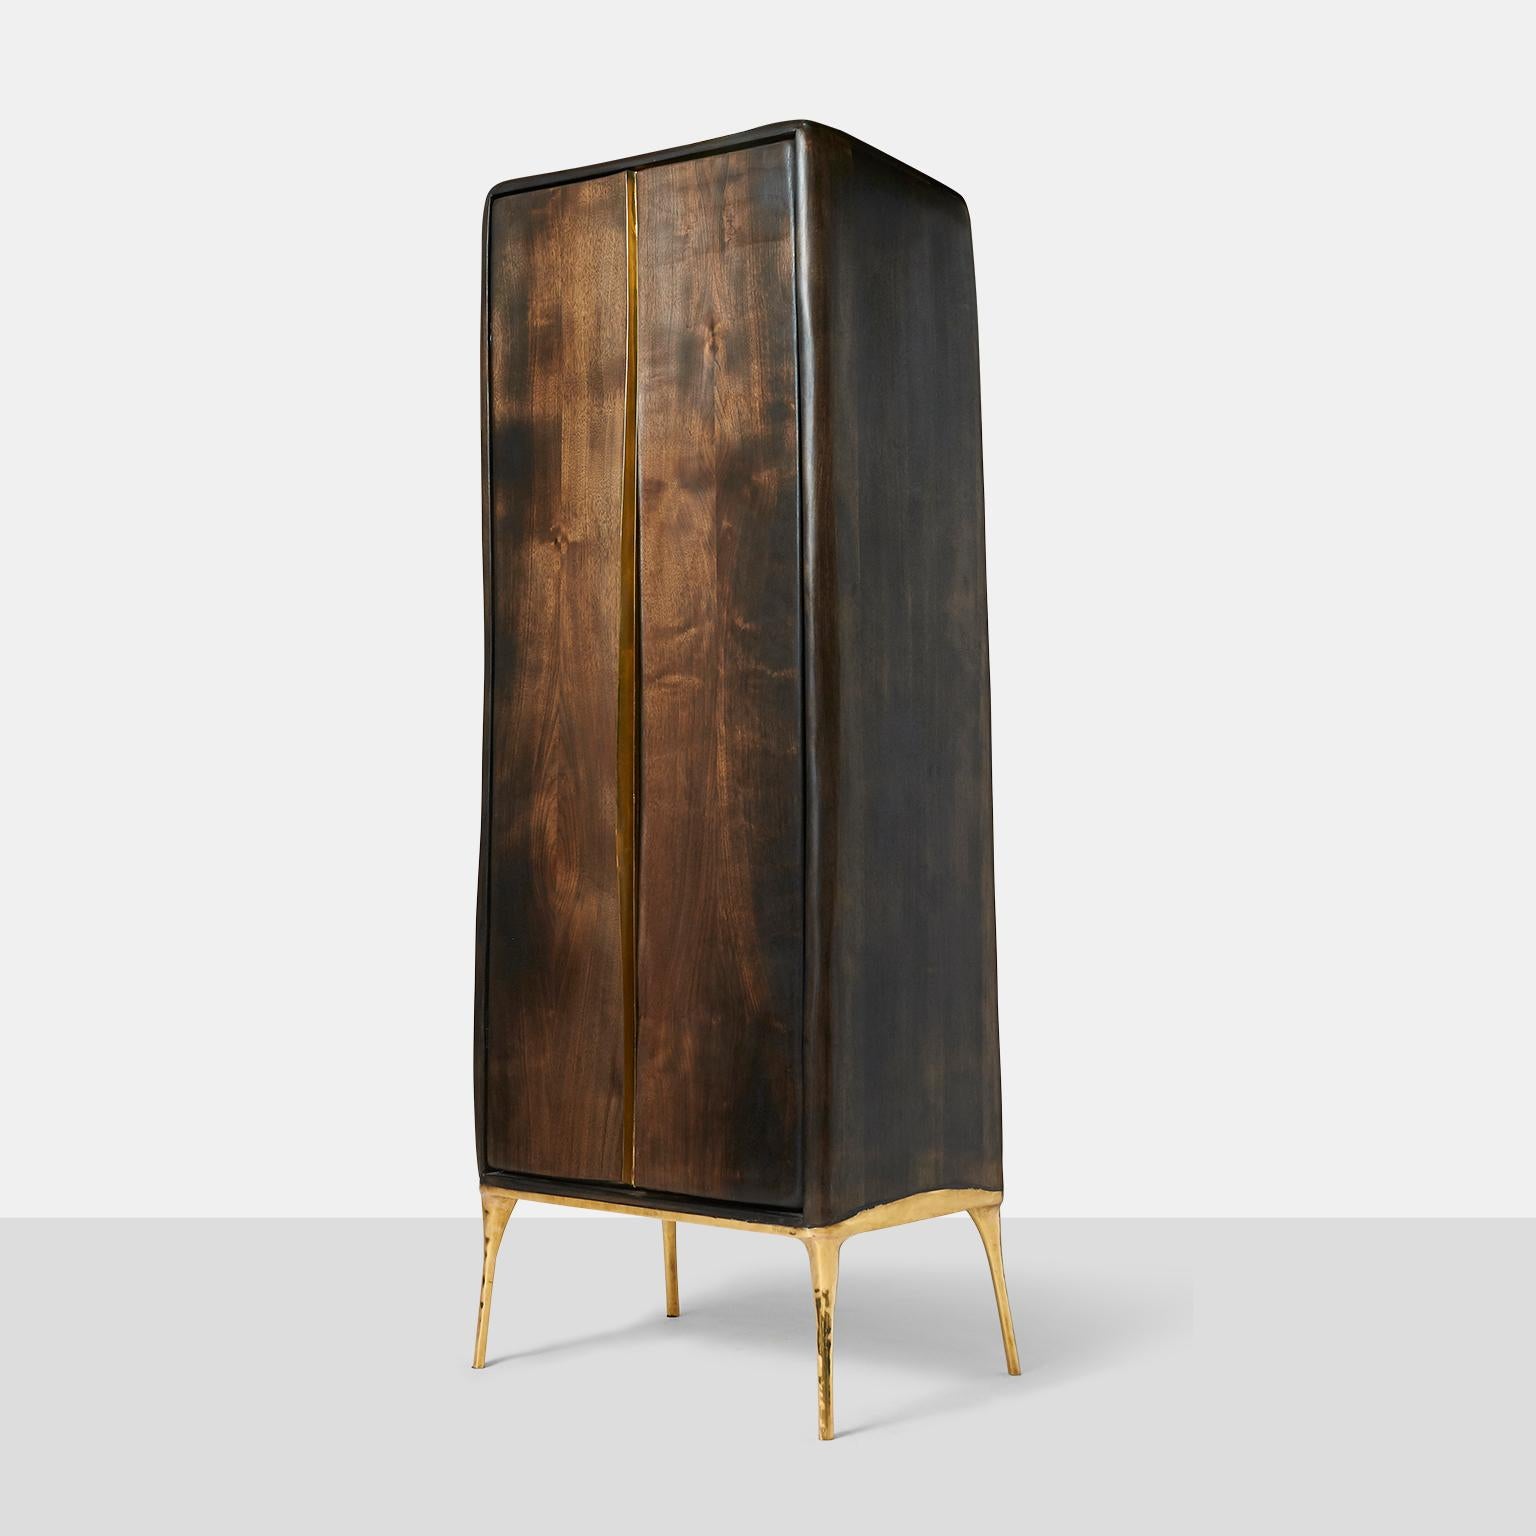 Valentin Loellmann, Armoire
An organic shaped two-door armoire in walnut with brass lined doors and door pulls. The cabinet top has a downsloping shape to the back.
Netherlands, c.2017.